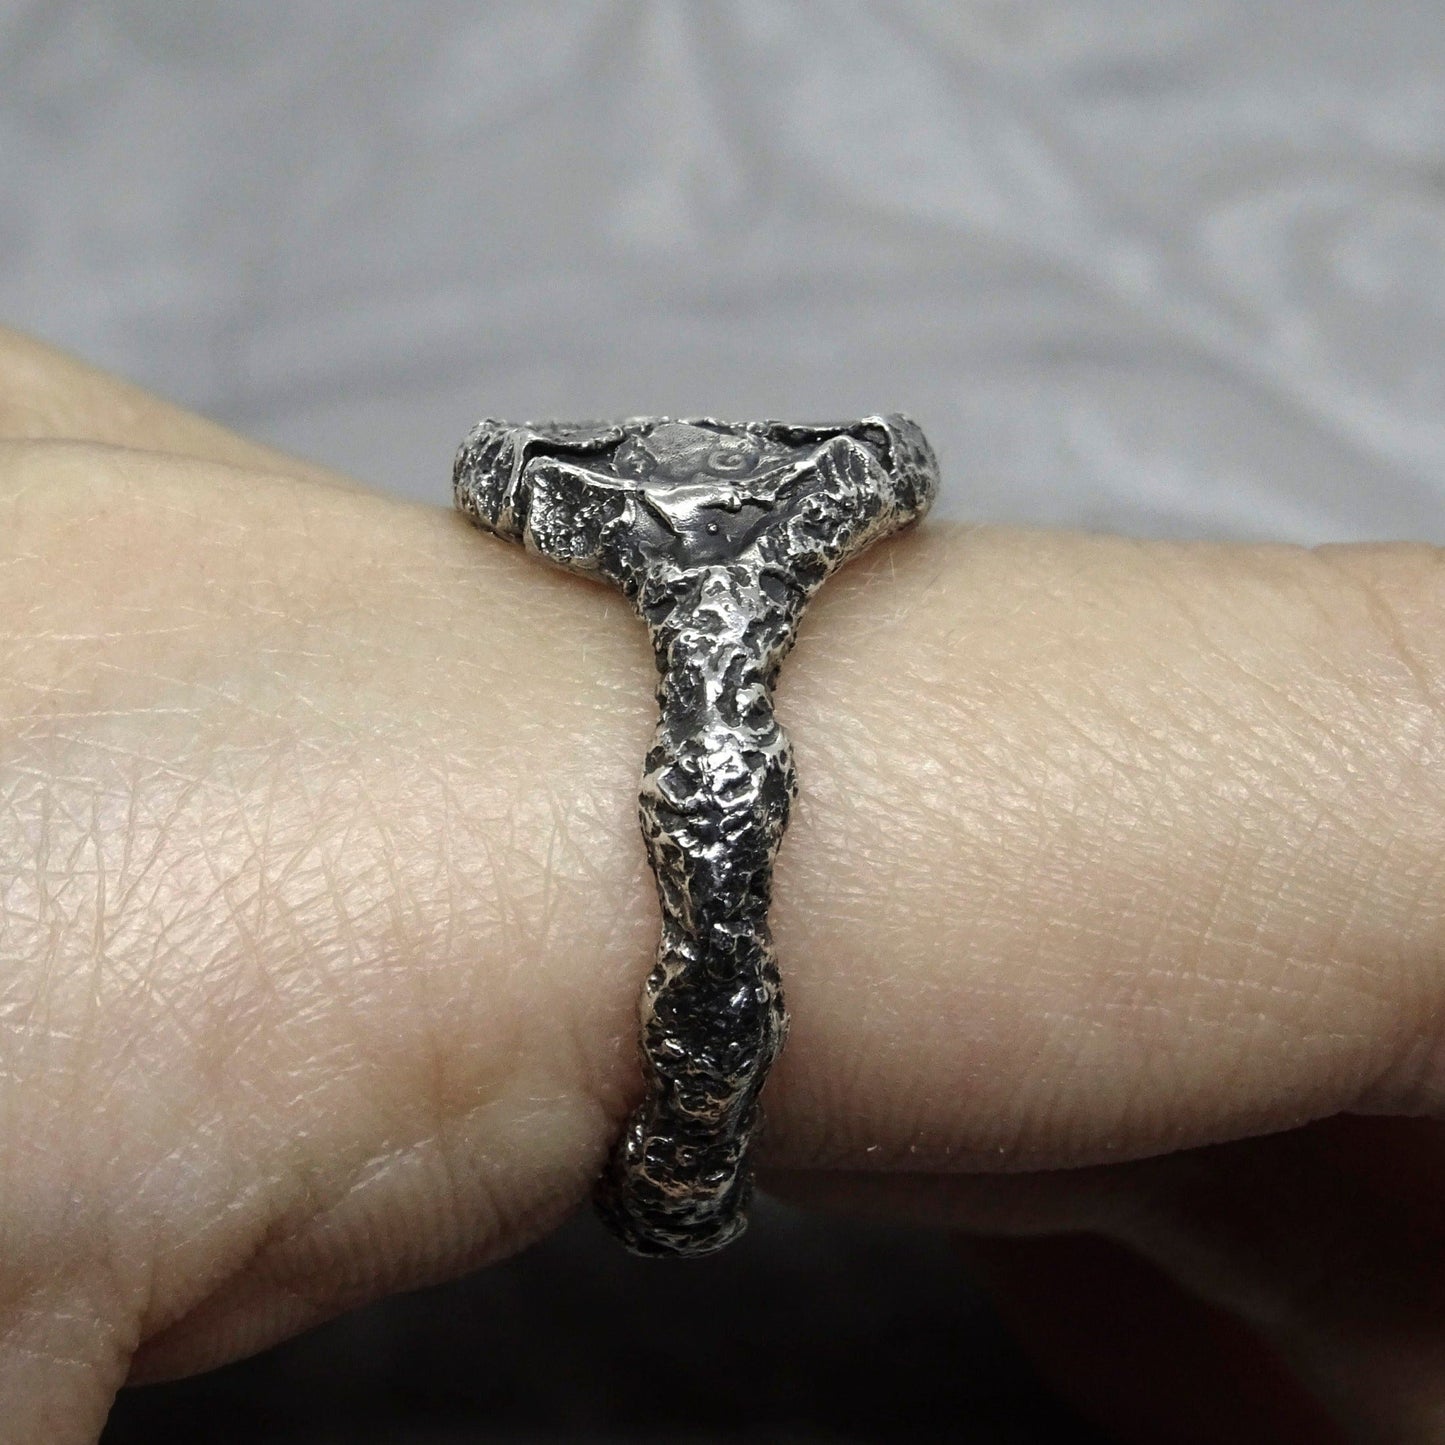 Byzantium ring- Unusual ring with patterns and cracks Rings with cracks and patterns Project50g 